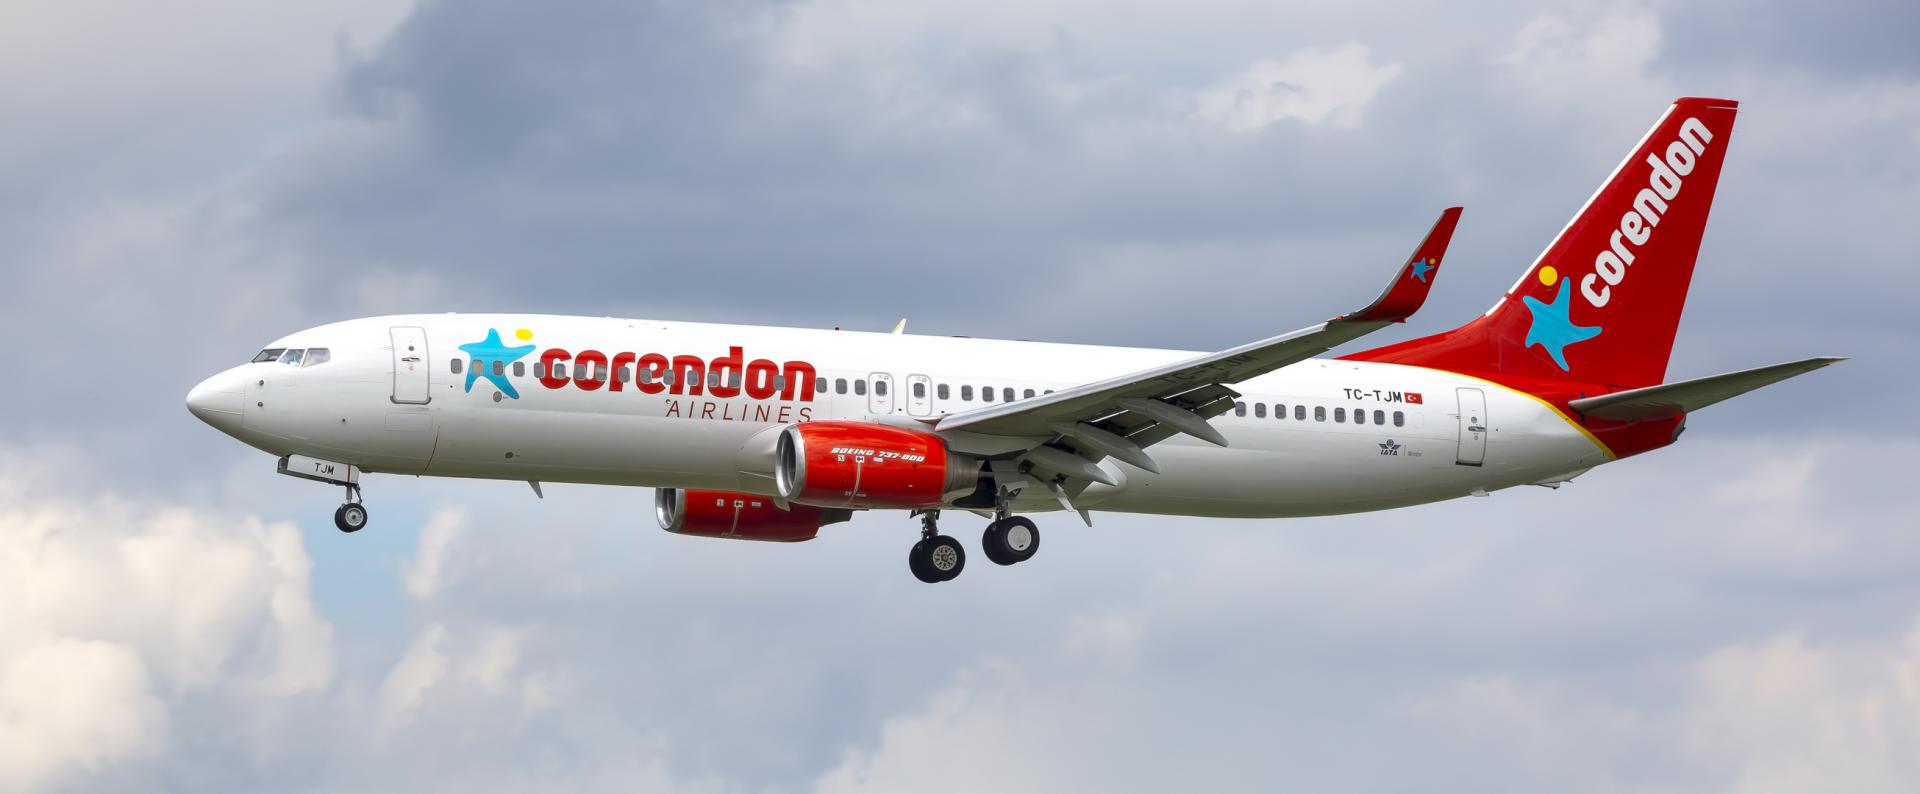 Corendon airlines 70d3eeef 3229 4634 a1b9 8bbb6dce6aa6